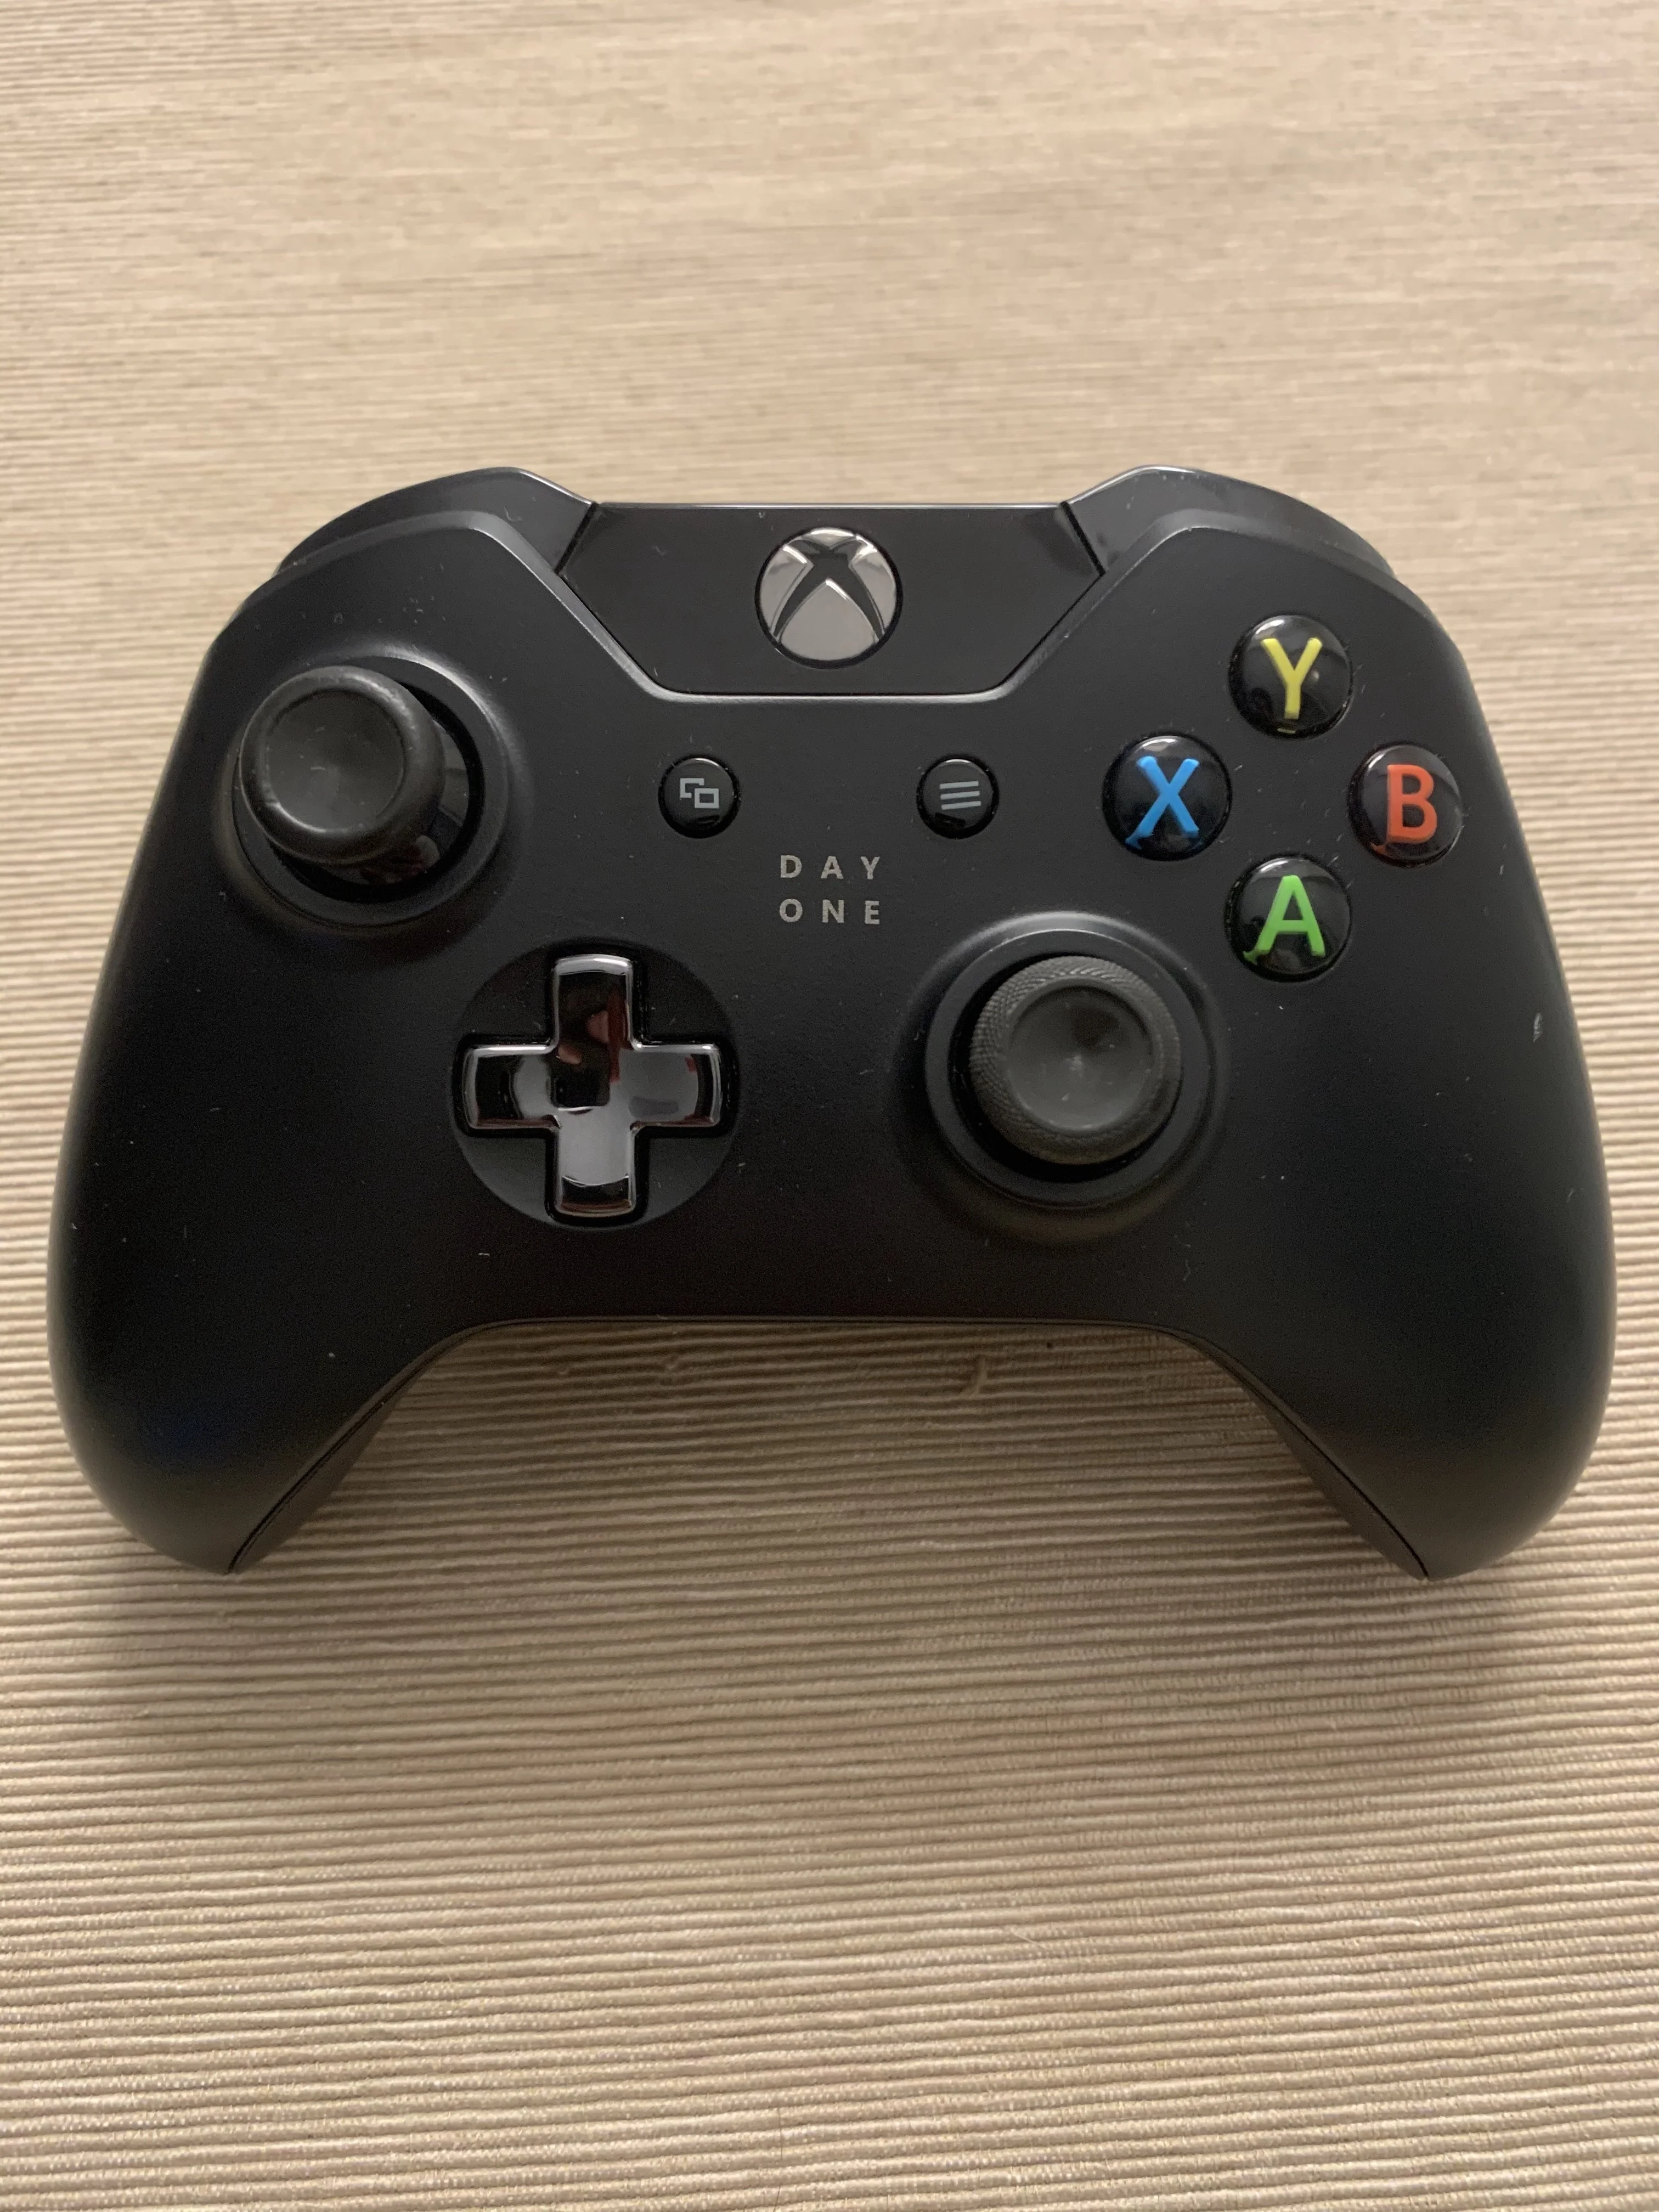  Microsoft Xbox One Day One Controller